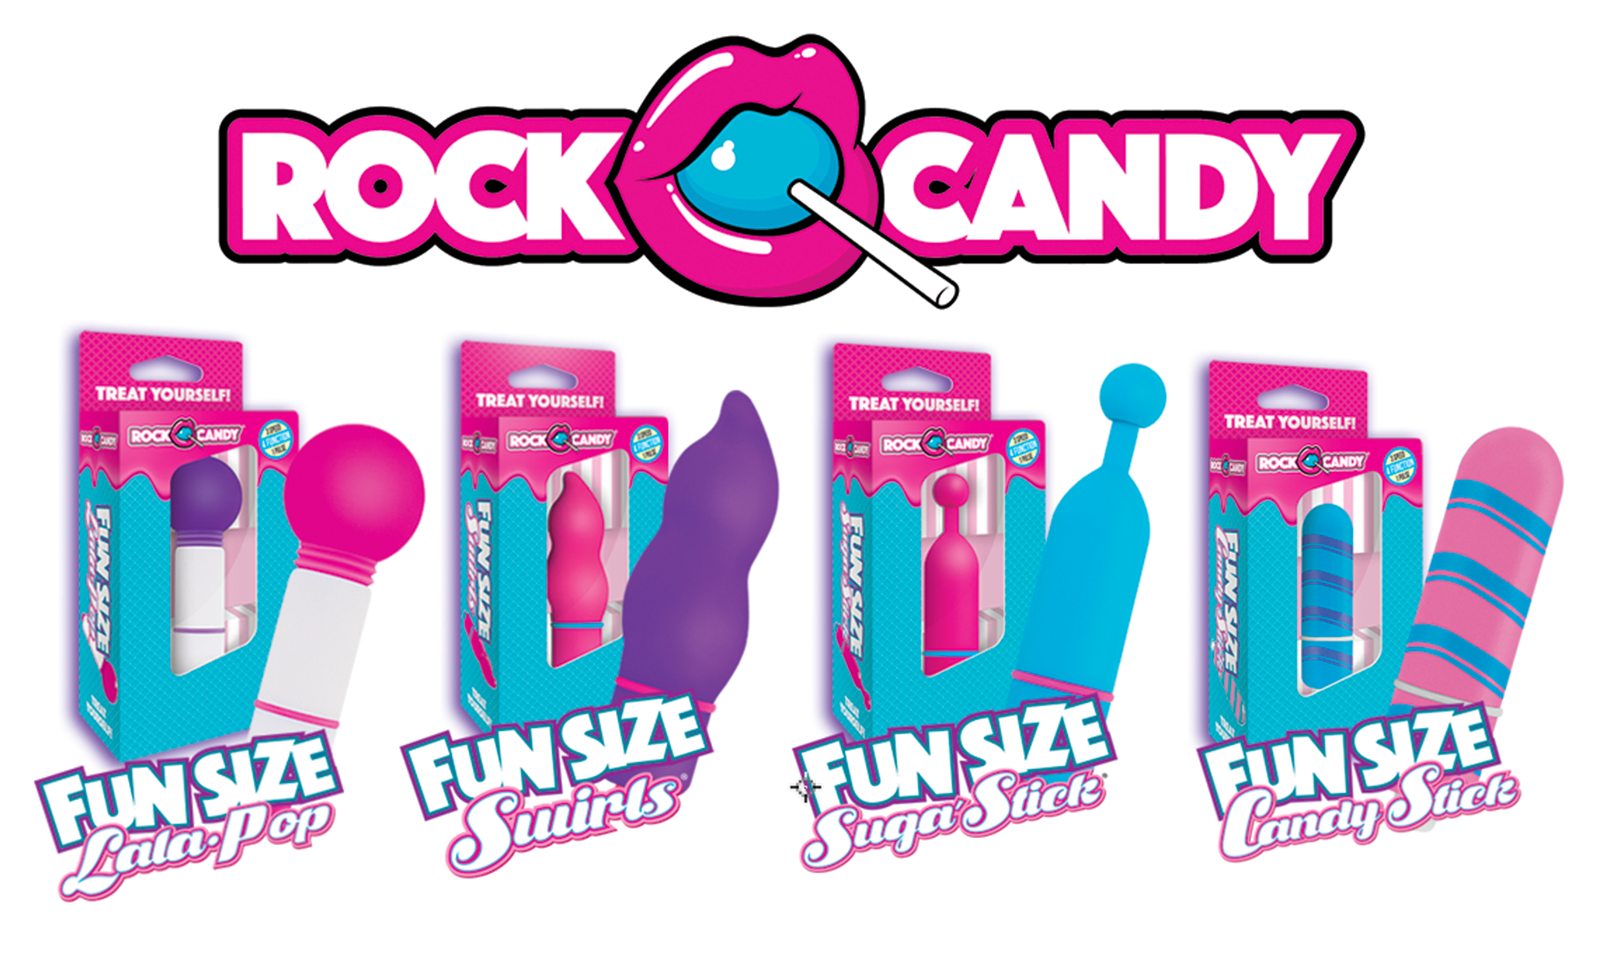 Rock Candy Adds New Fun Size Collection To Top-Selling Vibe Line